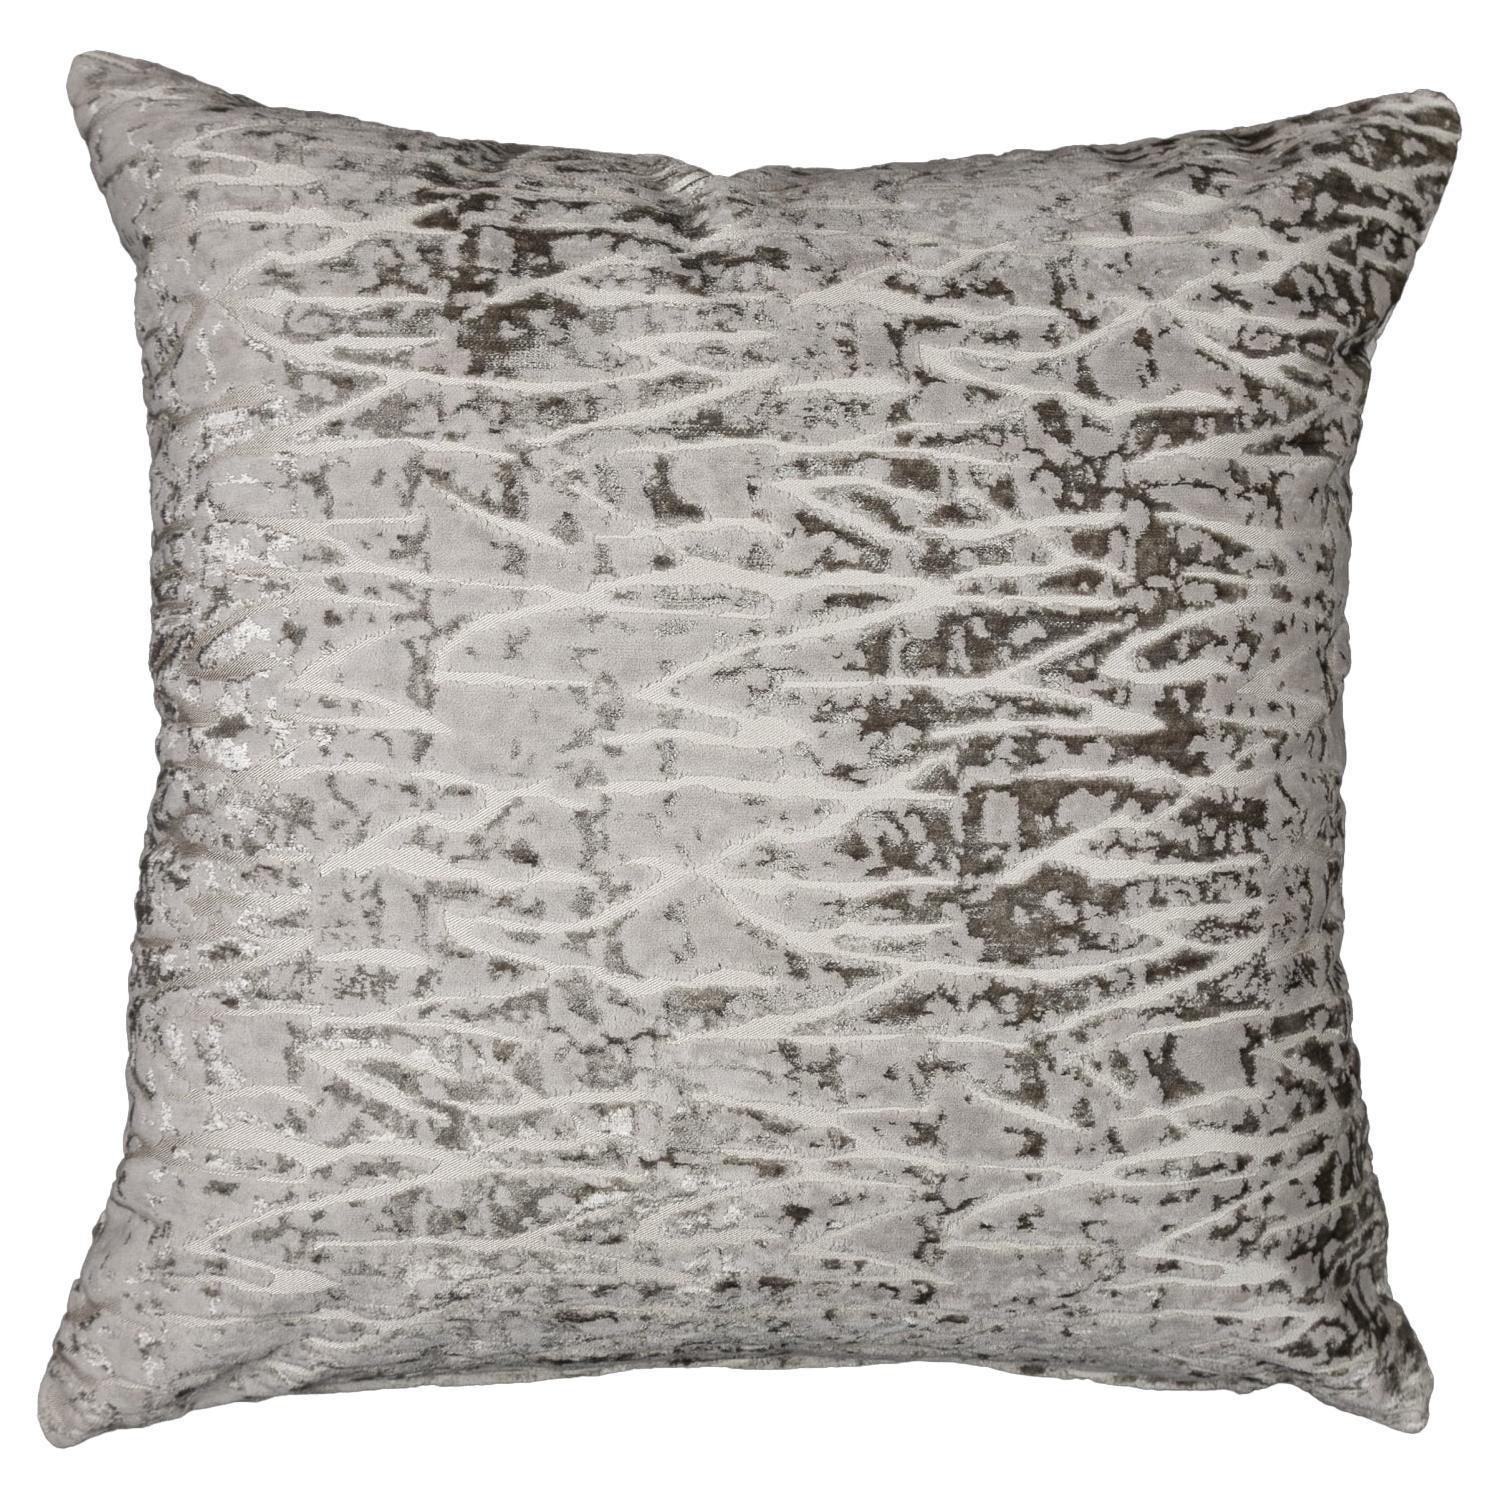 Platinum/silver throw pillow in textured velvets- Platinum Coral- by Mar de Doce